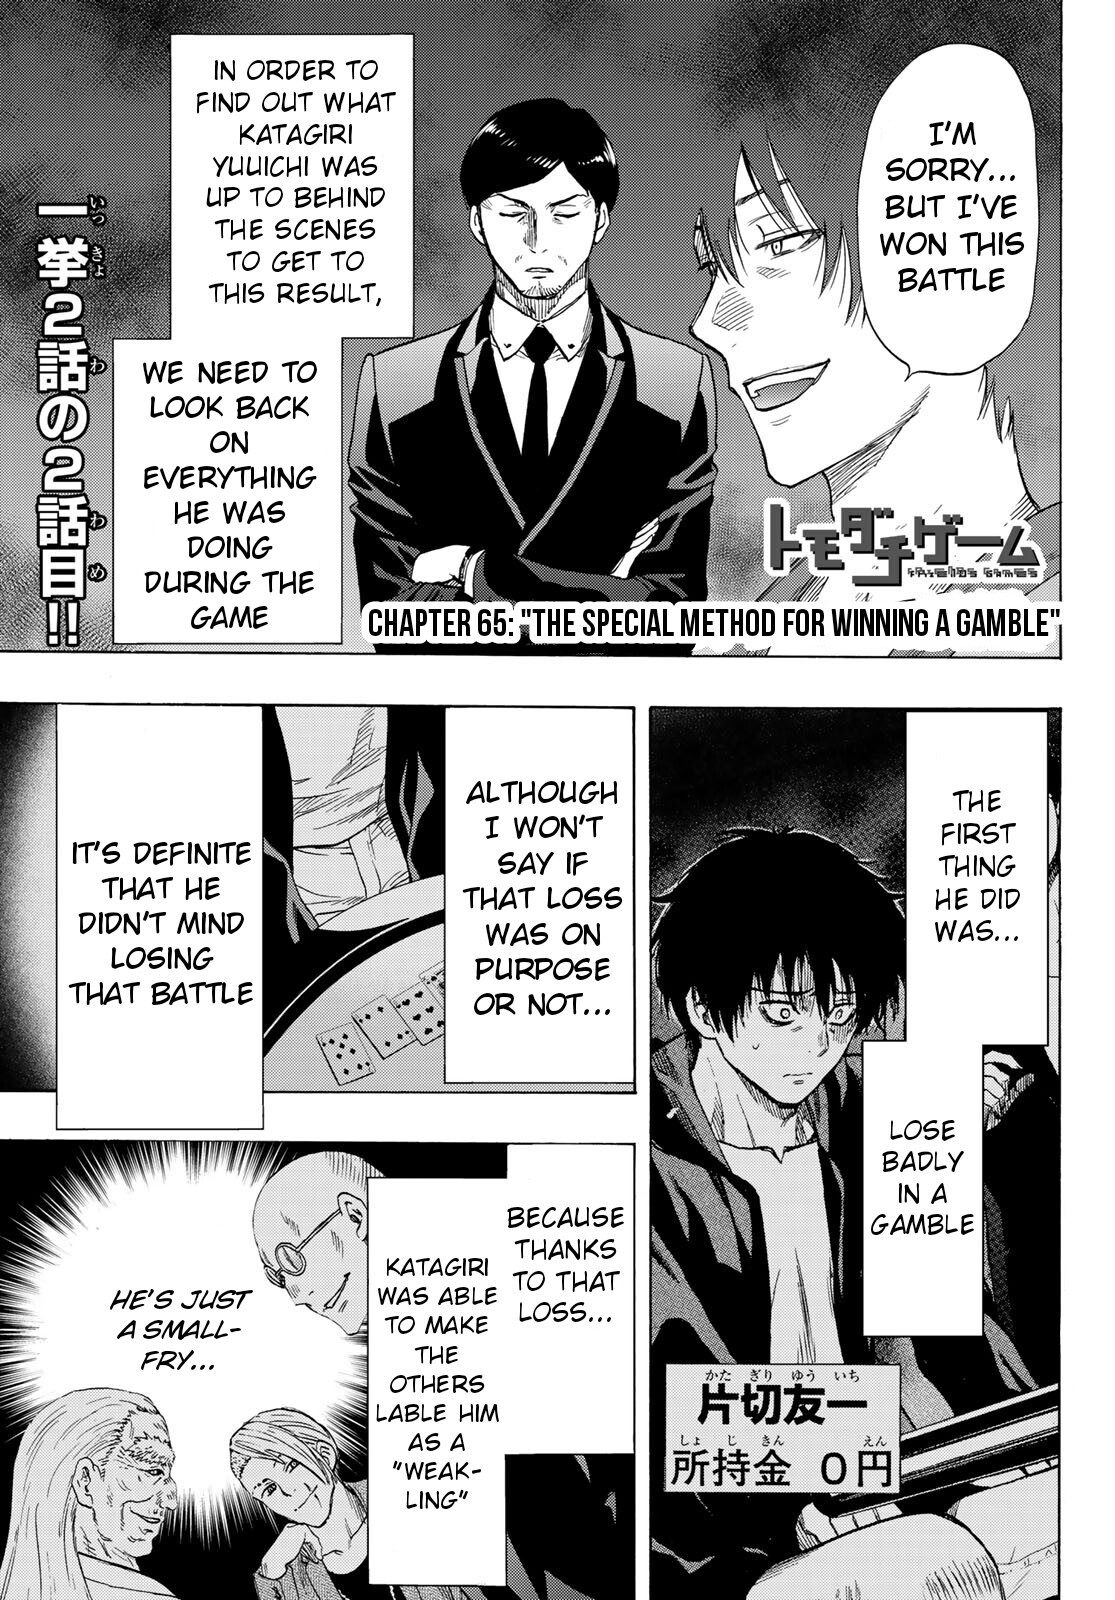 Tomodachi Game Ch. 65 "The Special Method for Winning a Gamble"